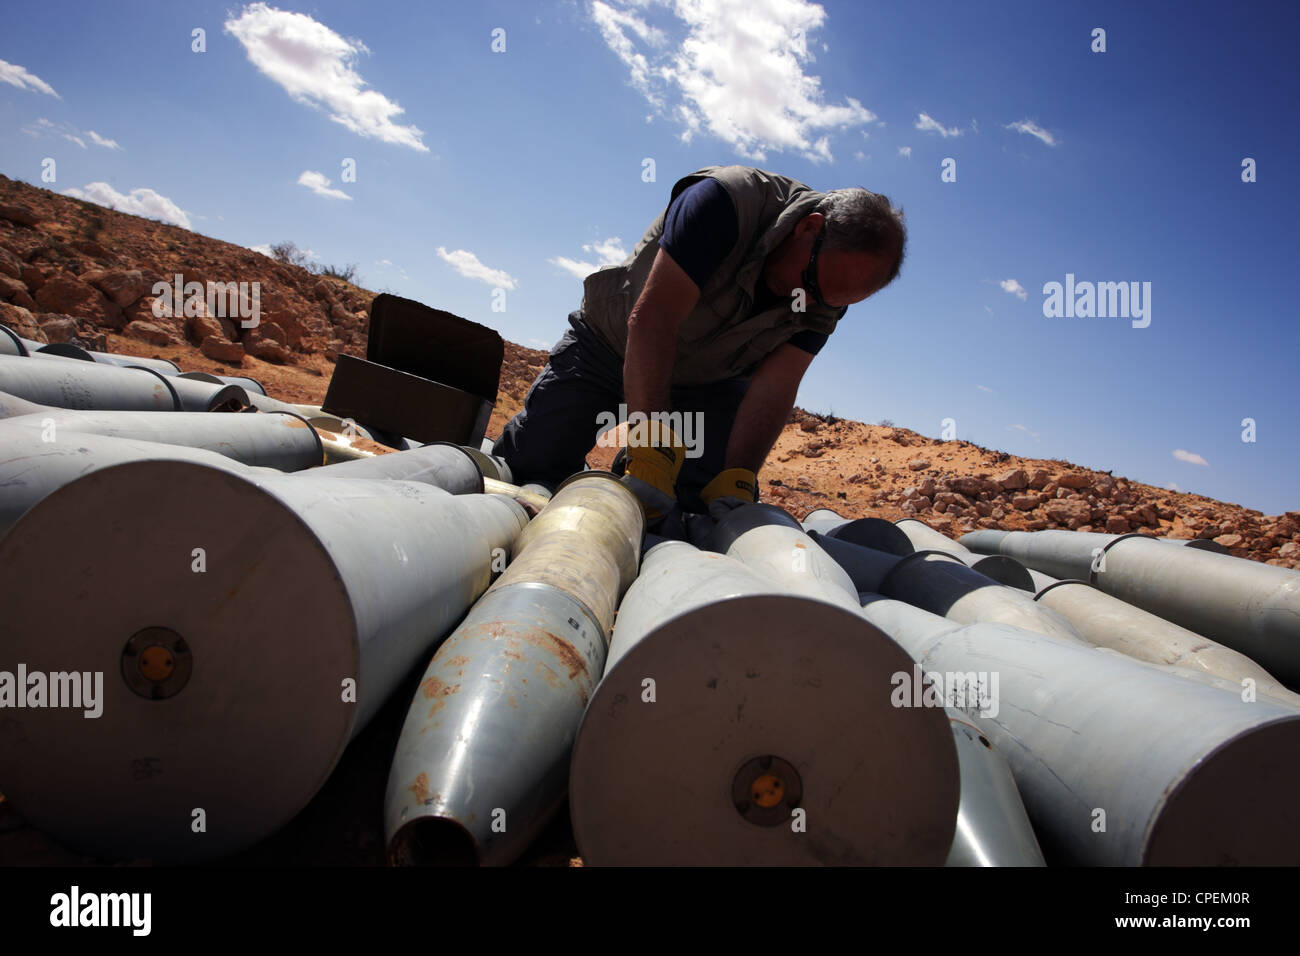 International mine and bomb disposal groups prepare demolition of a large stockpile of unexploded ordnance found in Sirte, Libya Stock Photo